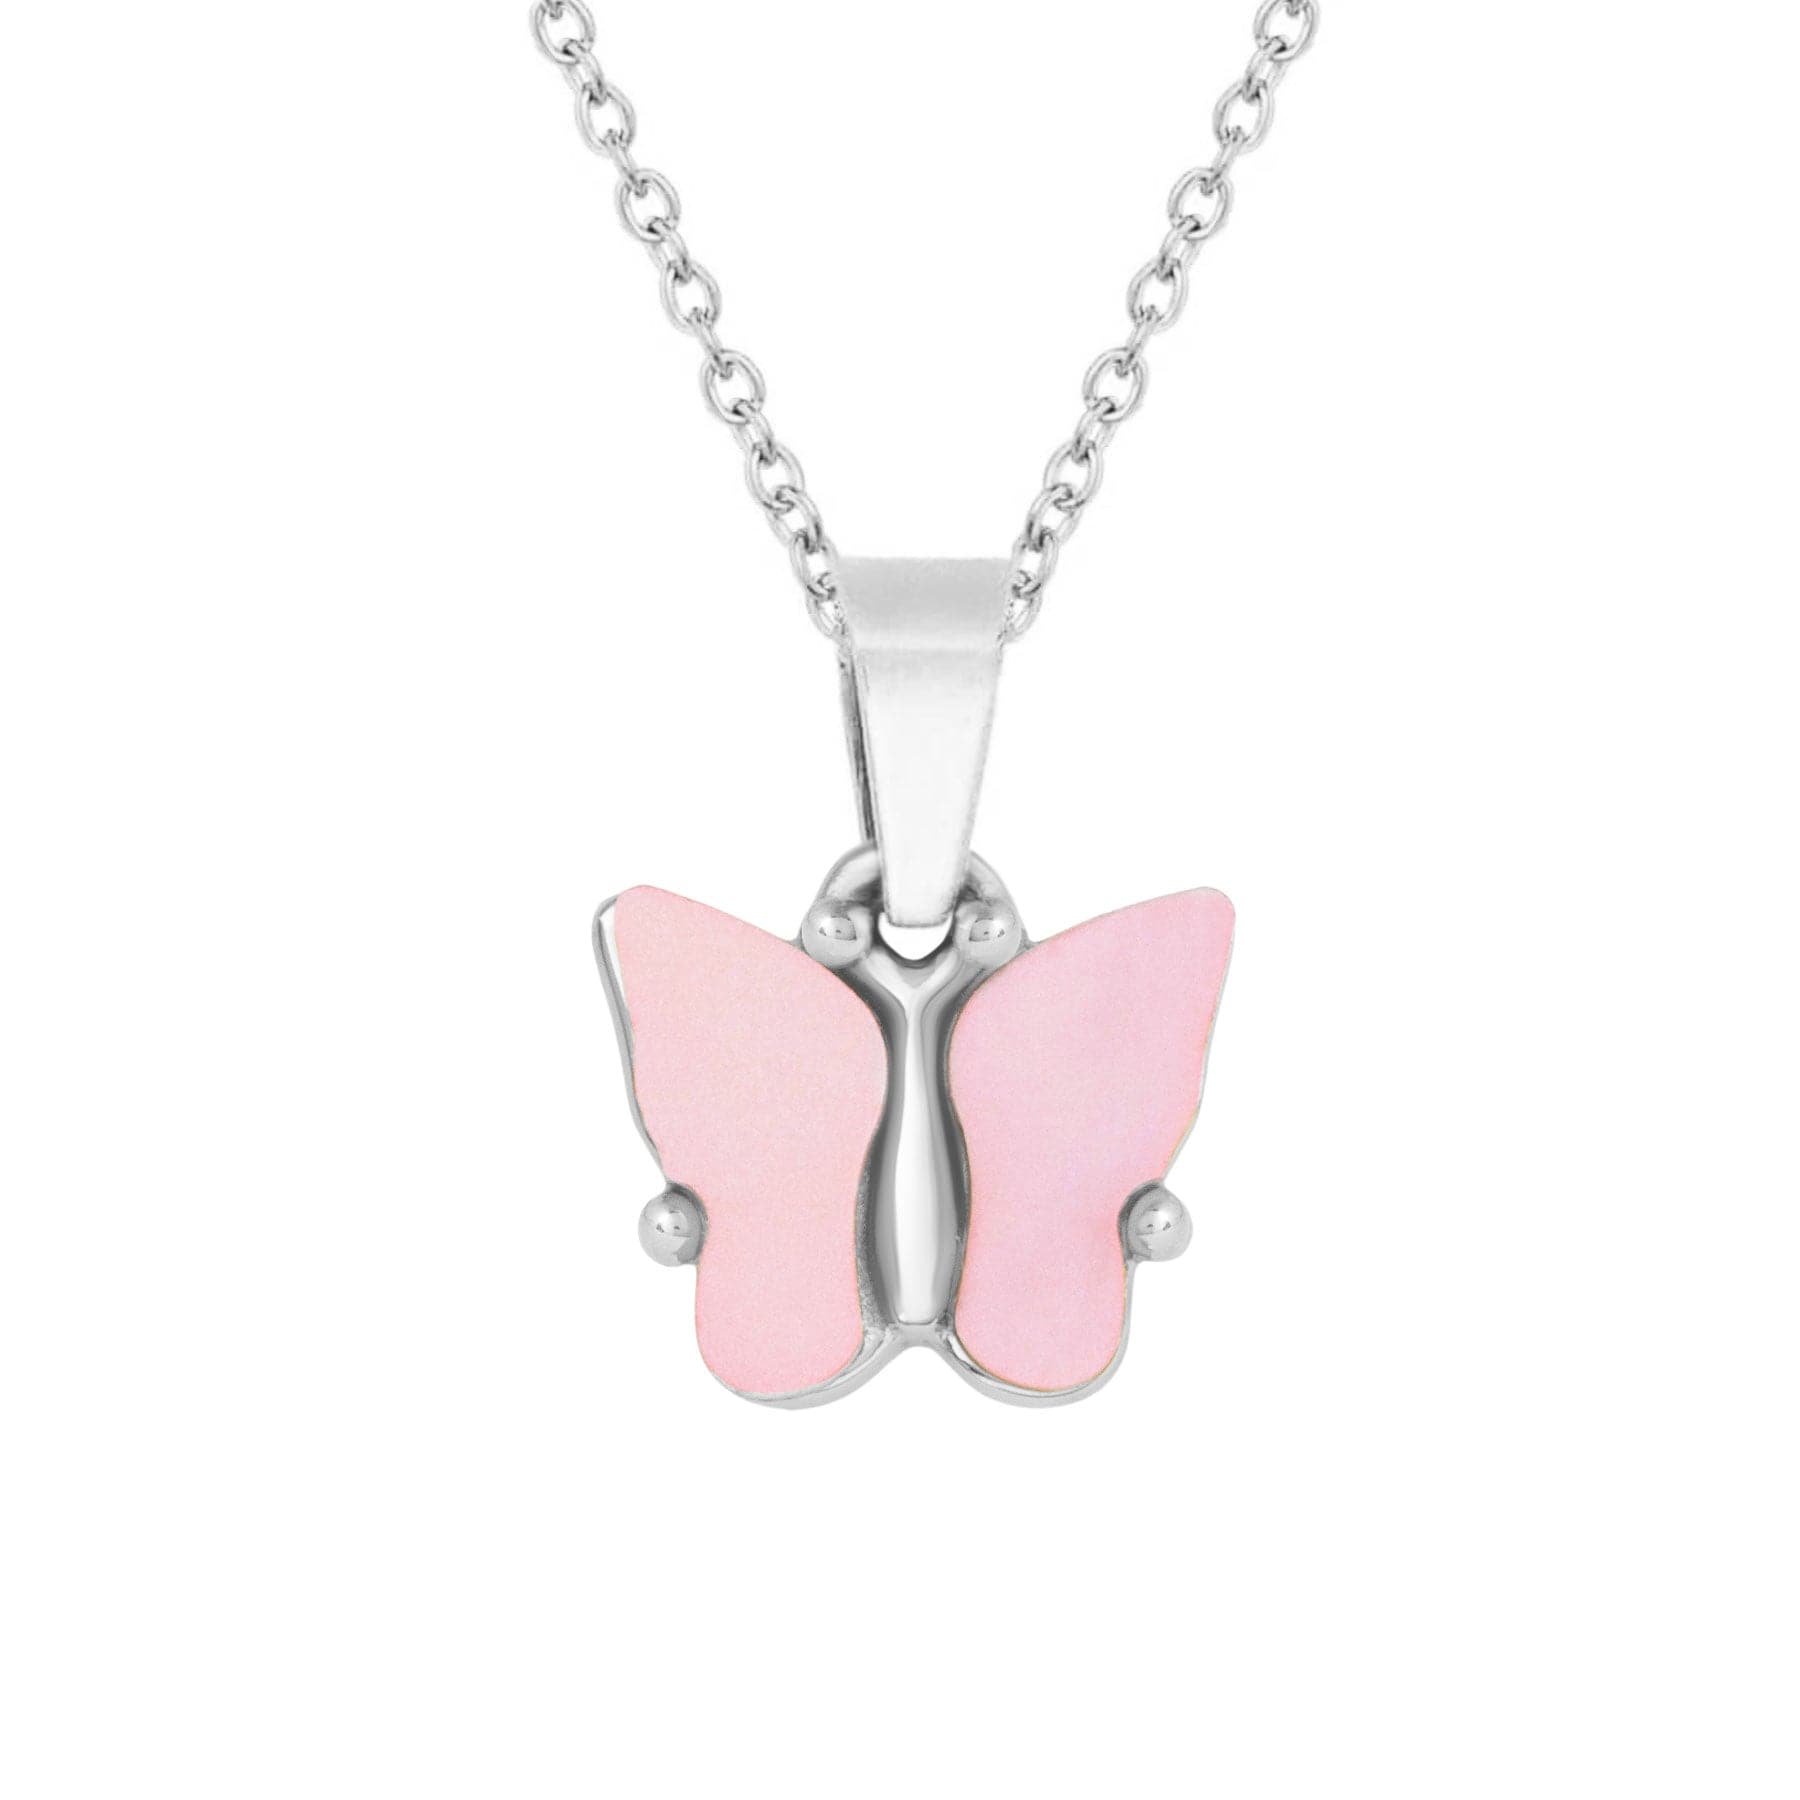 BohoMoon Stainless Steel Royale Butterfly Necklace Silver / Pink